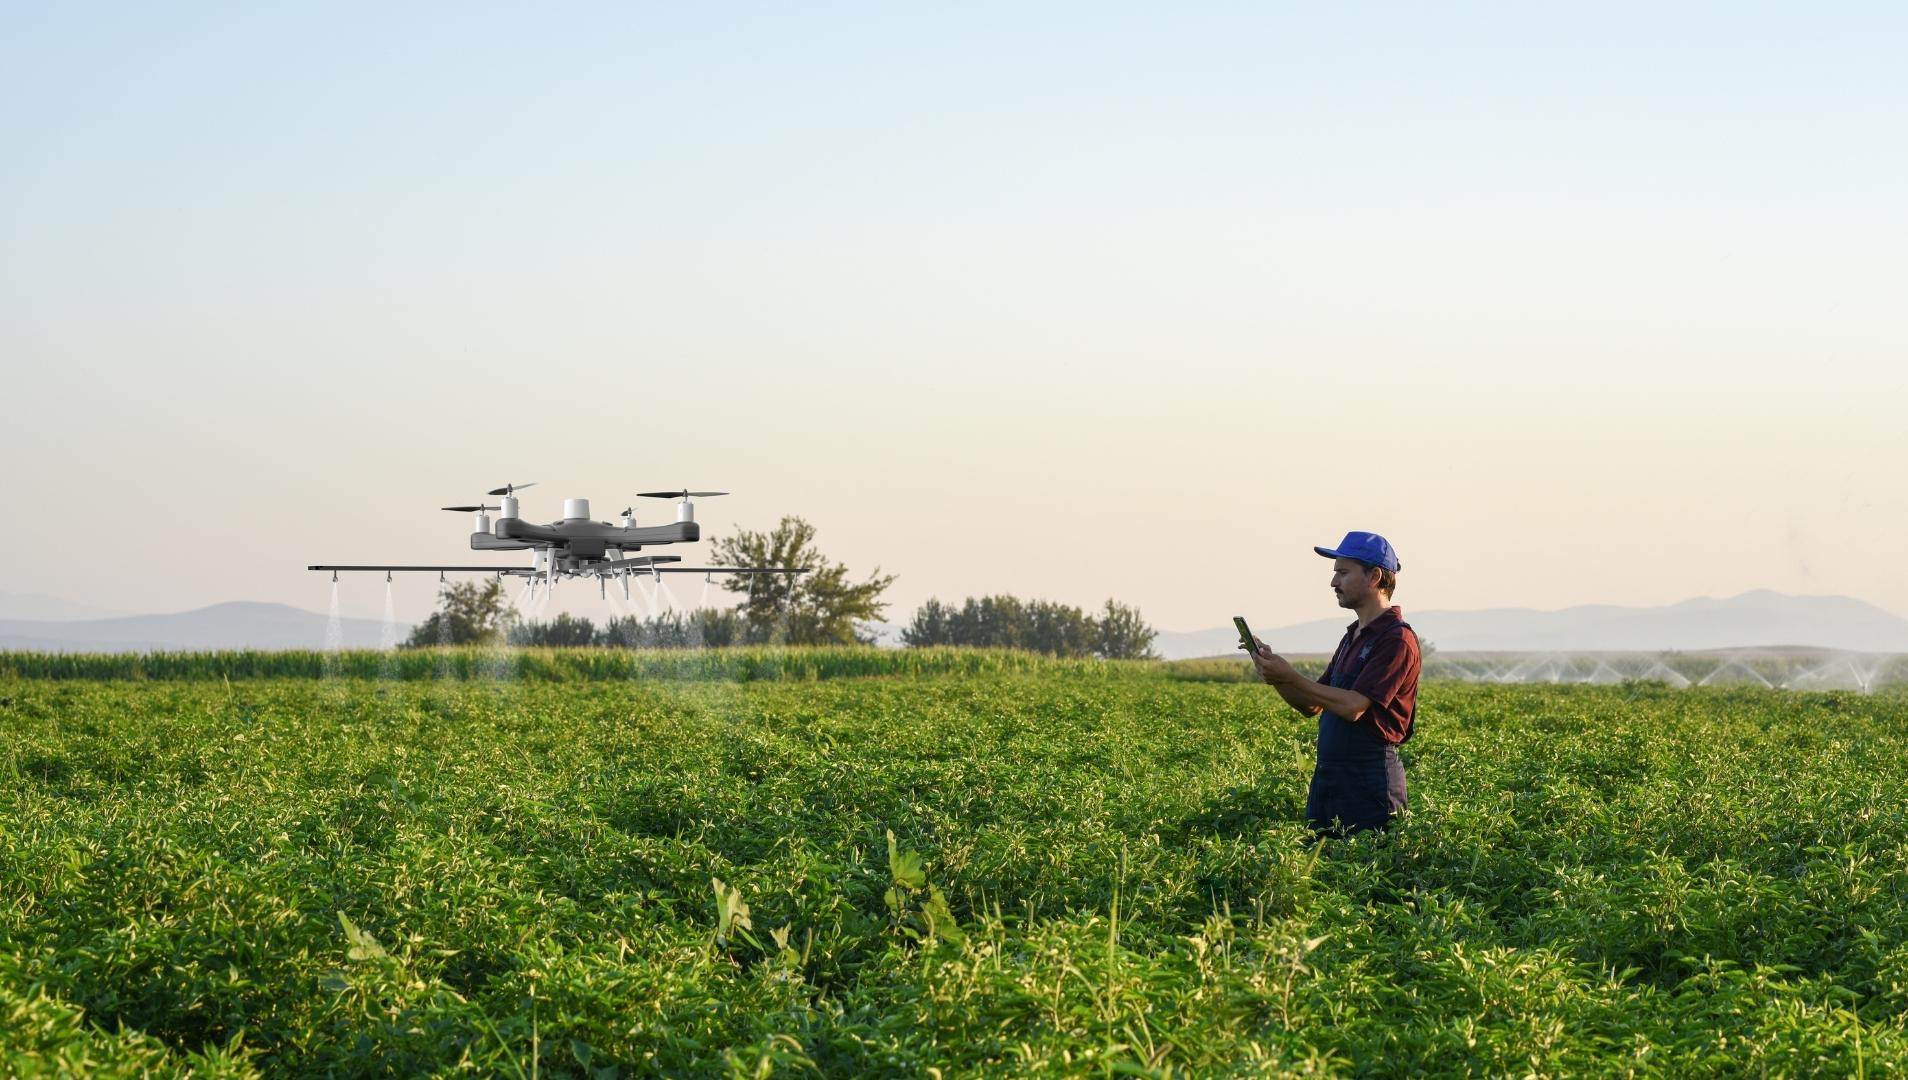 Agriculture Drone Being Used For Smart Farming